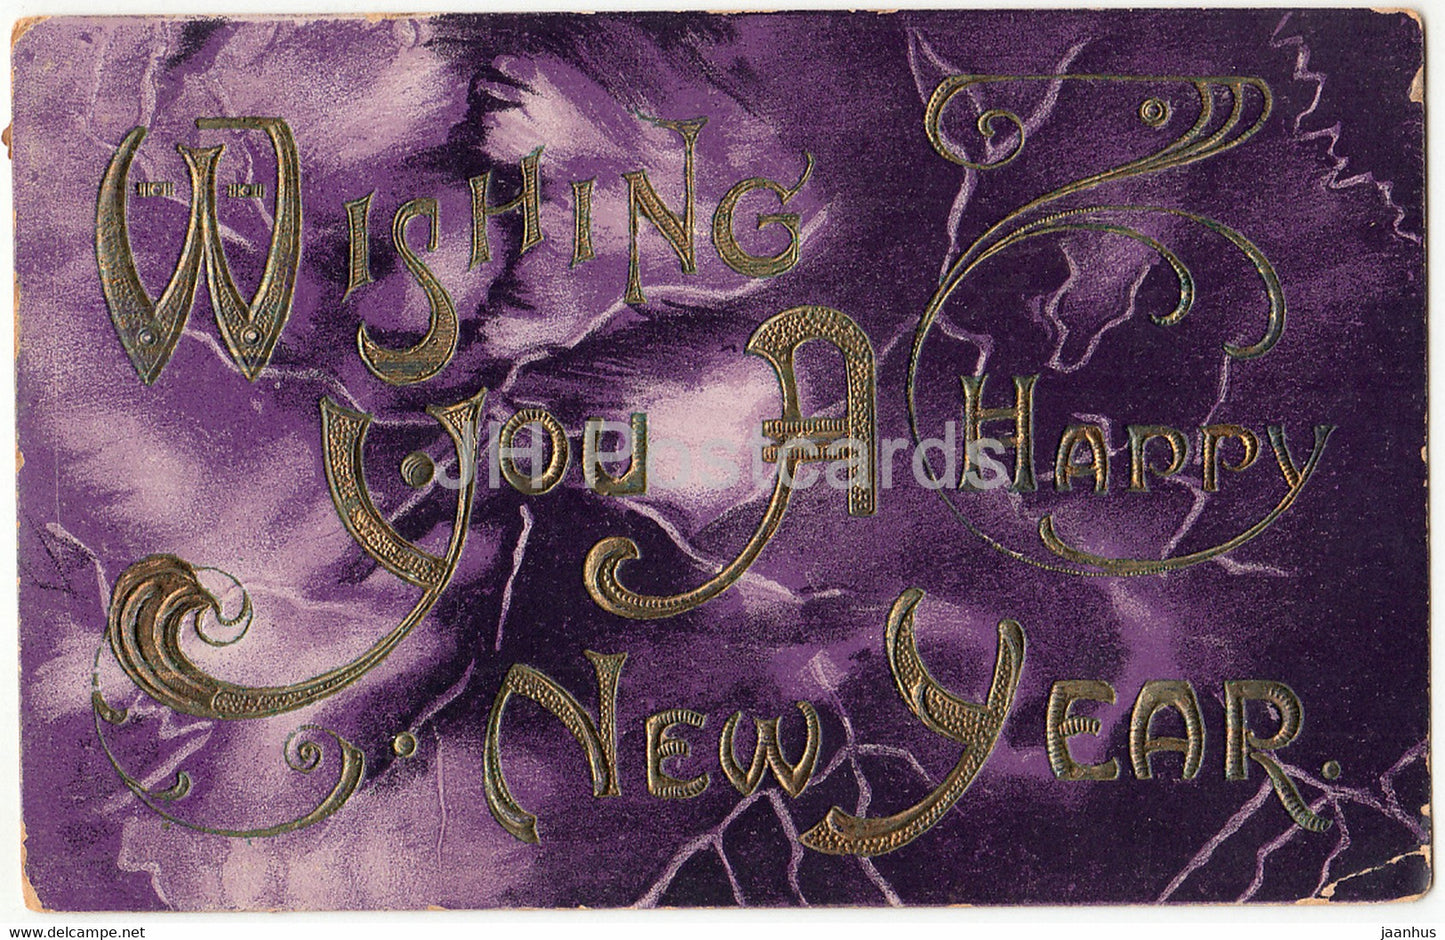 New Year Greeting Card - Wishing You A Happy New Year - old postcard - 1909 - USA - used - JH Postcards